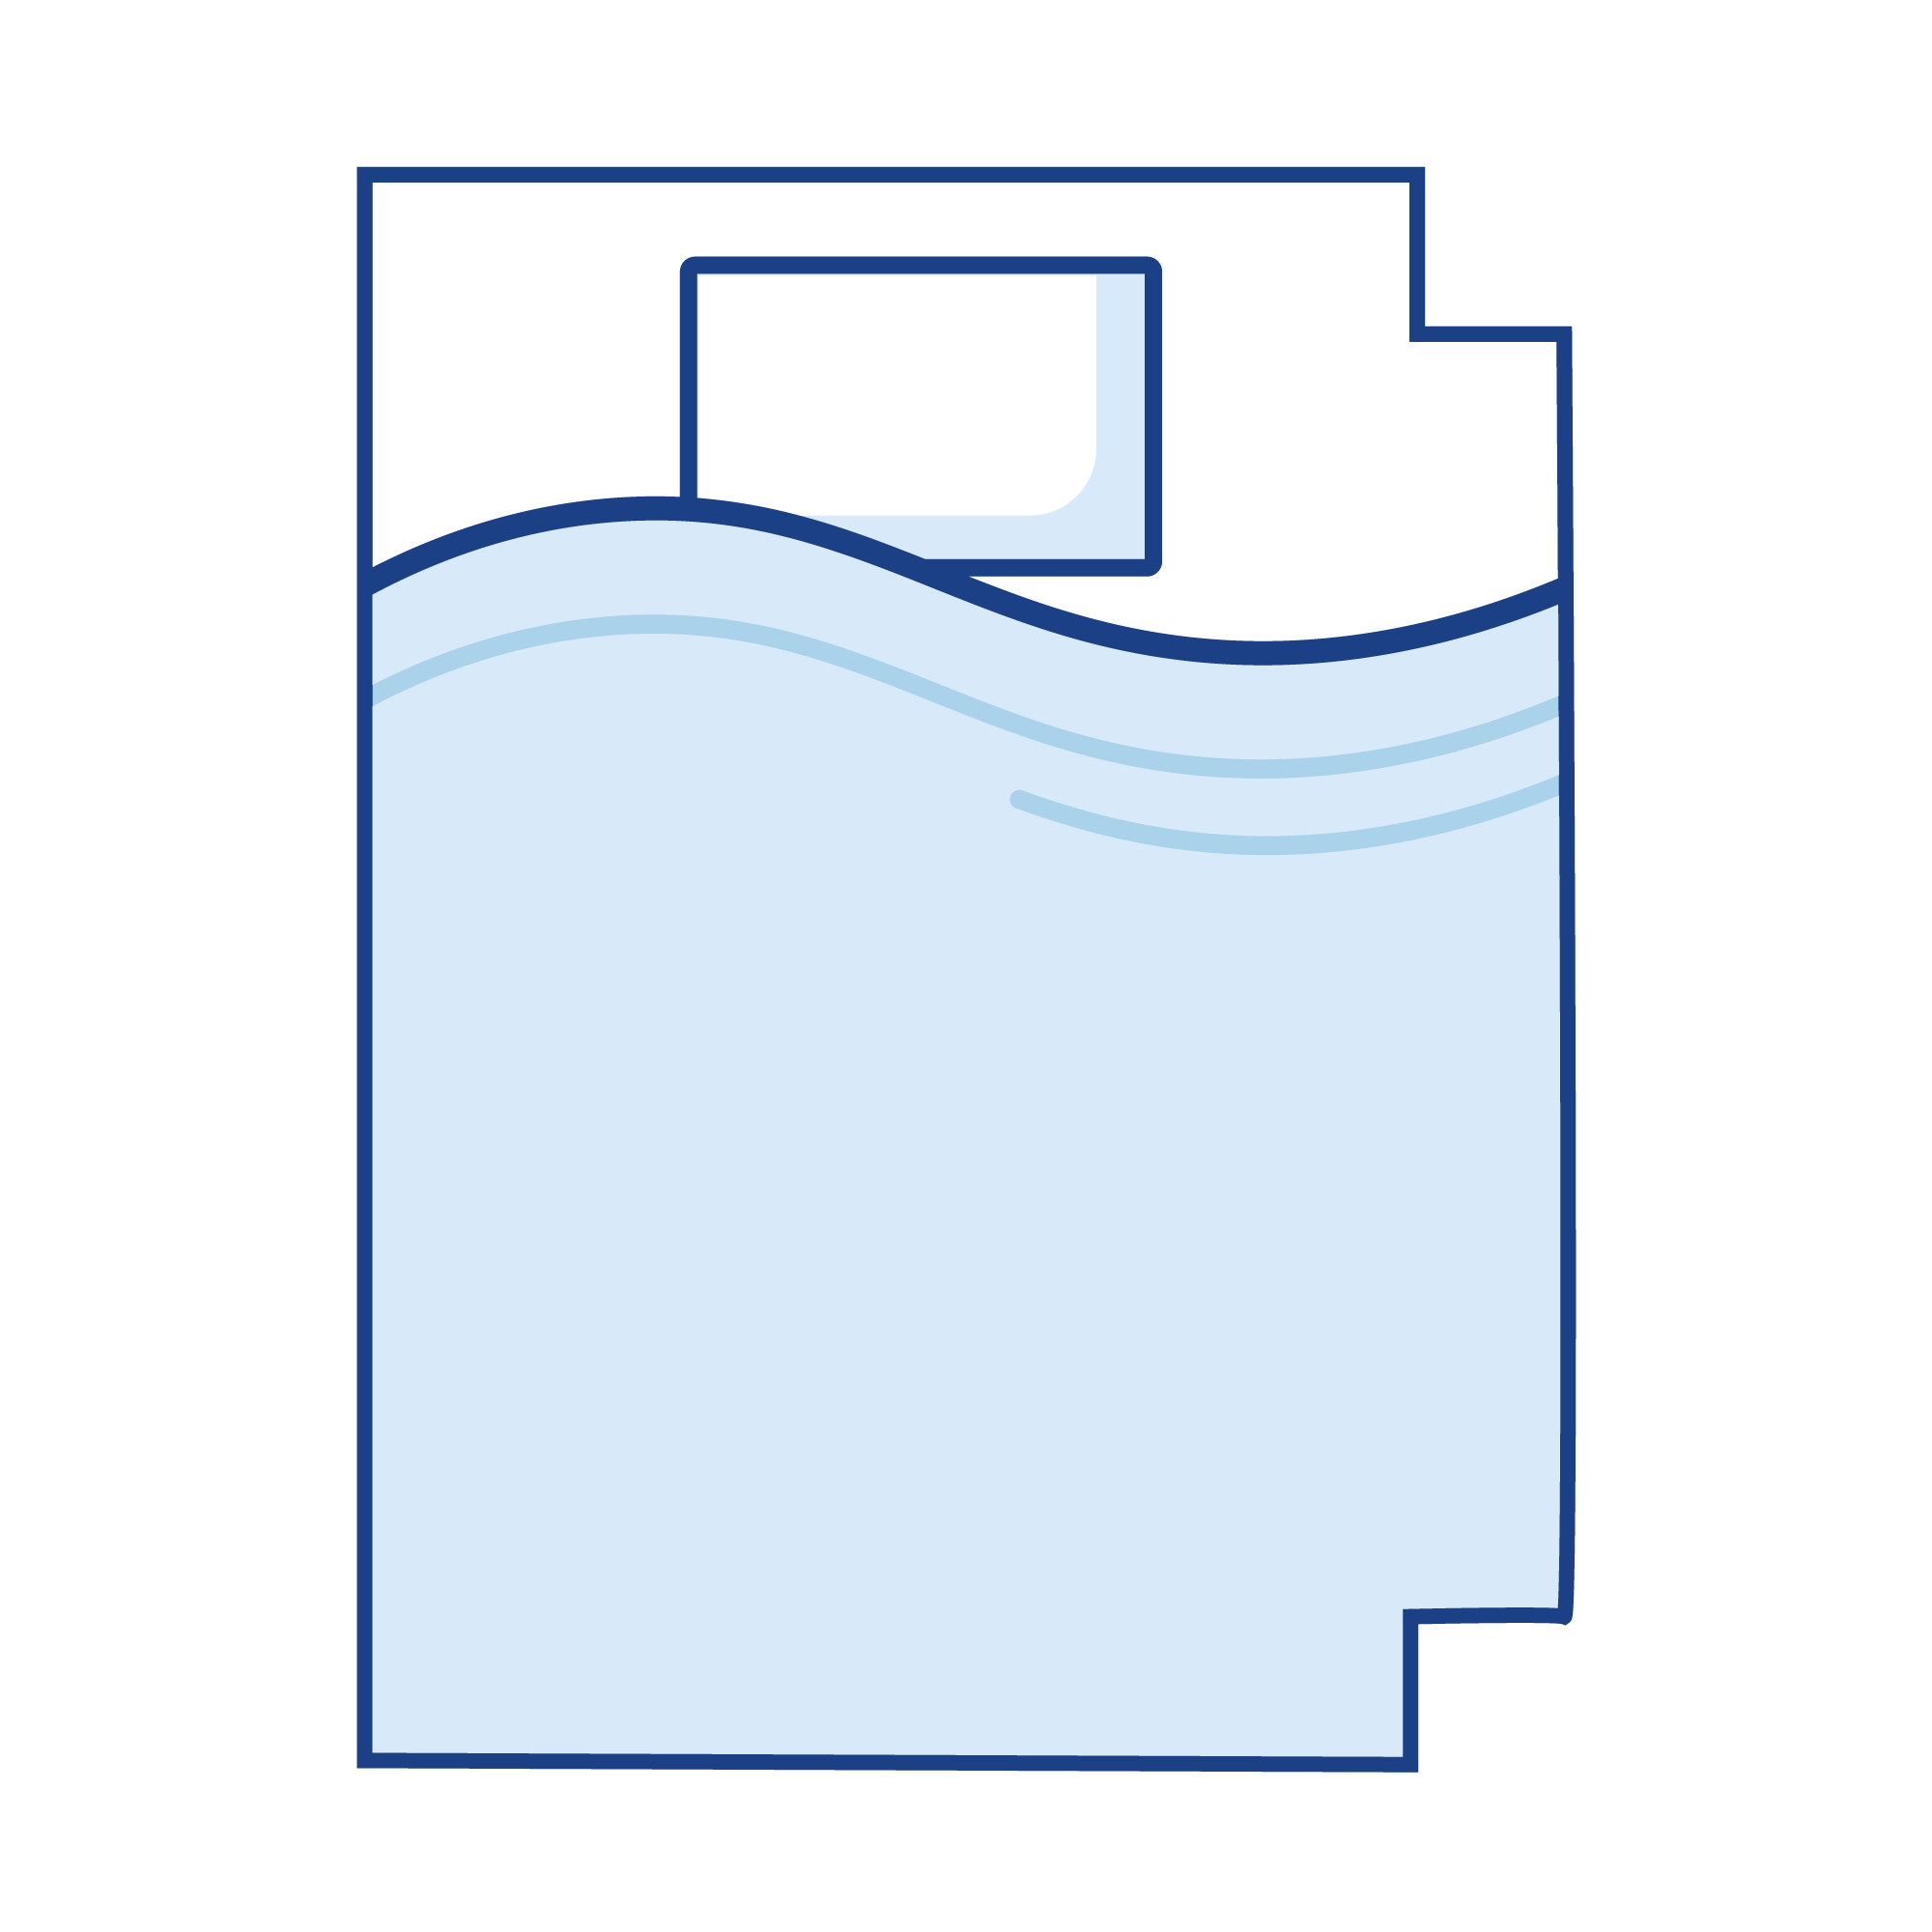 Illustration of a campervan mattress topper with two corner cut-outs on the same side.